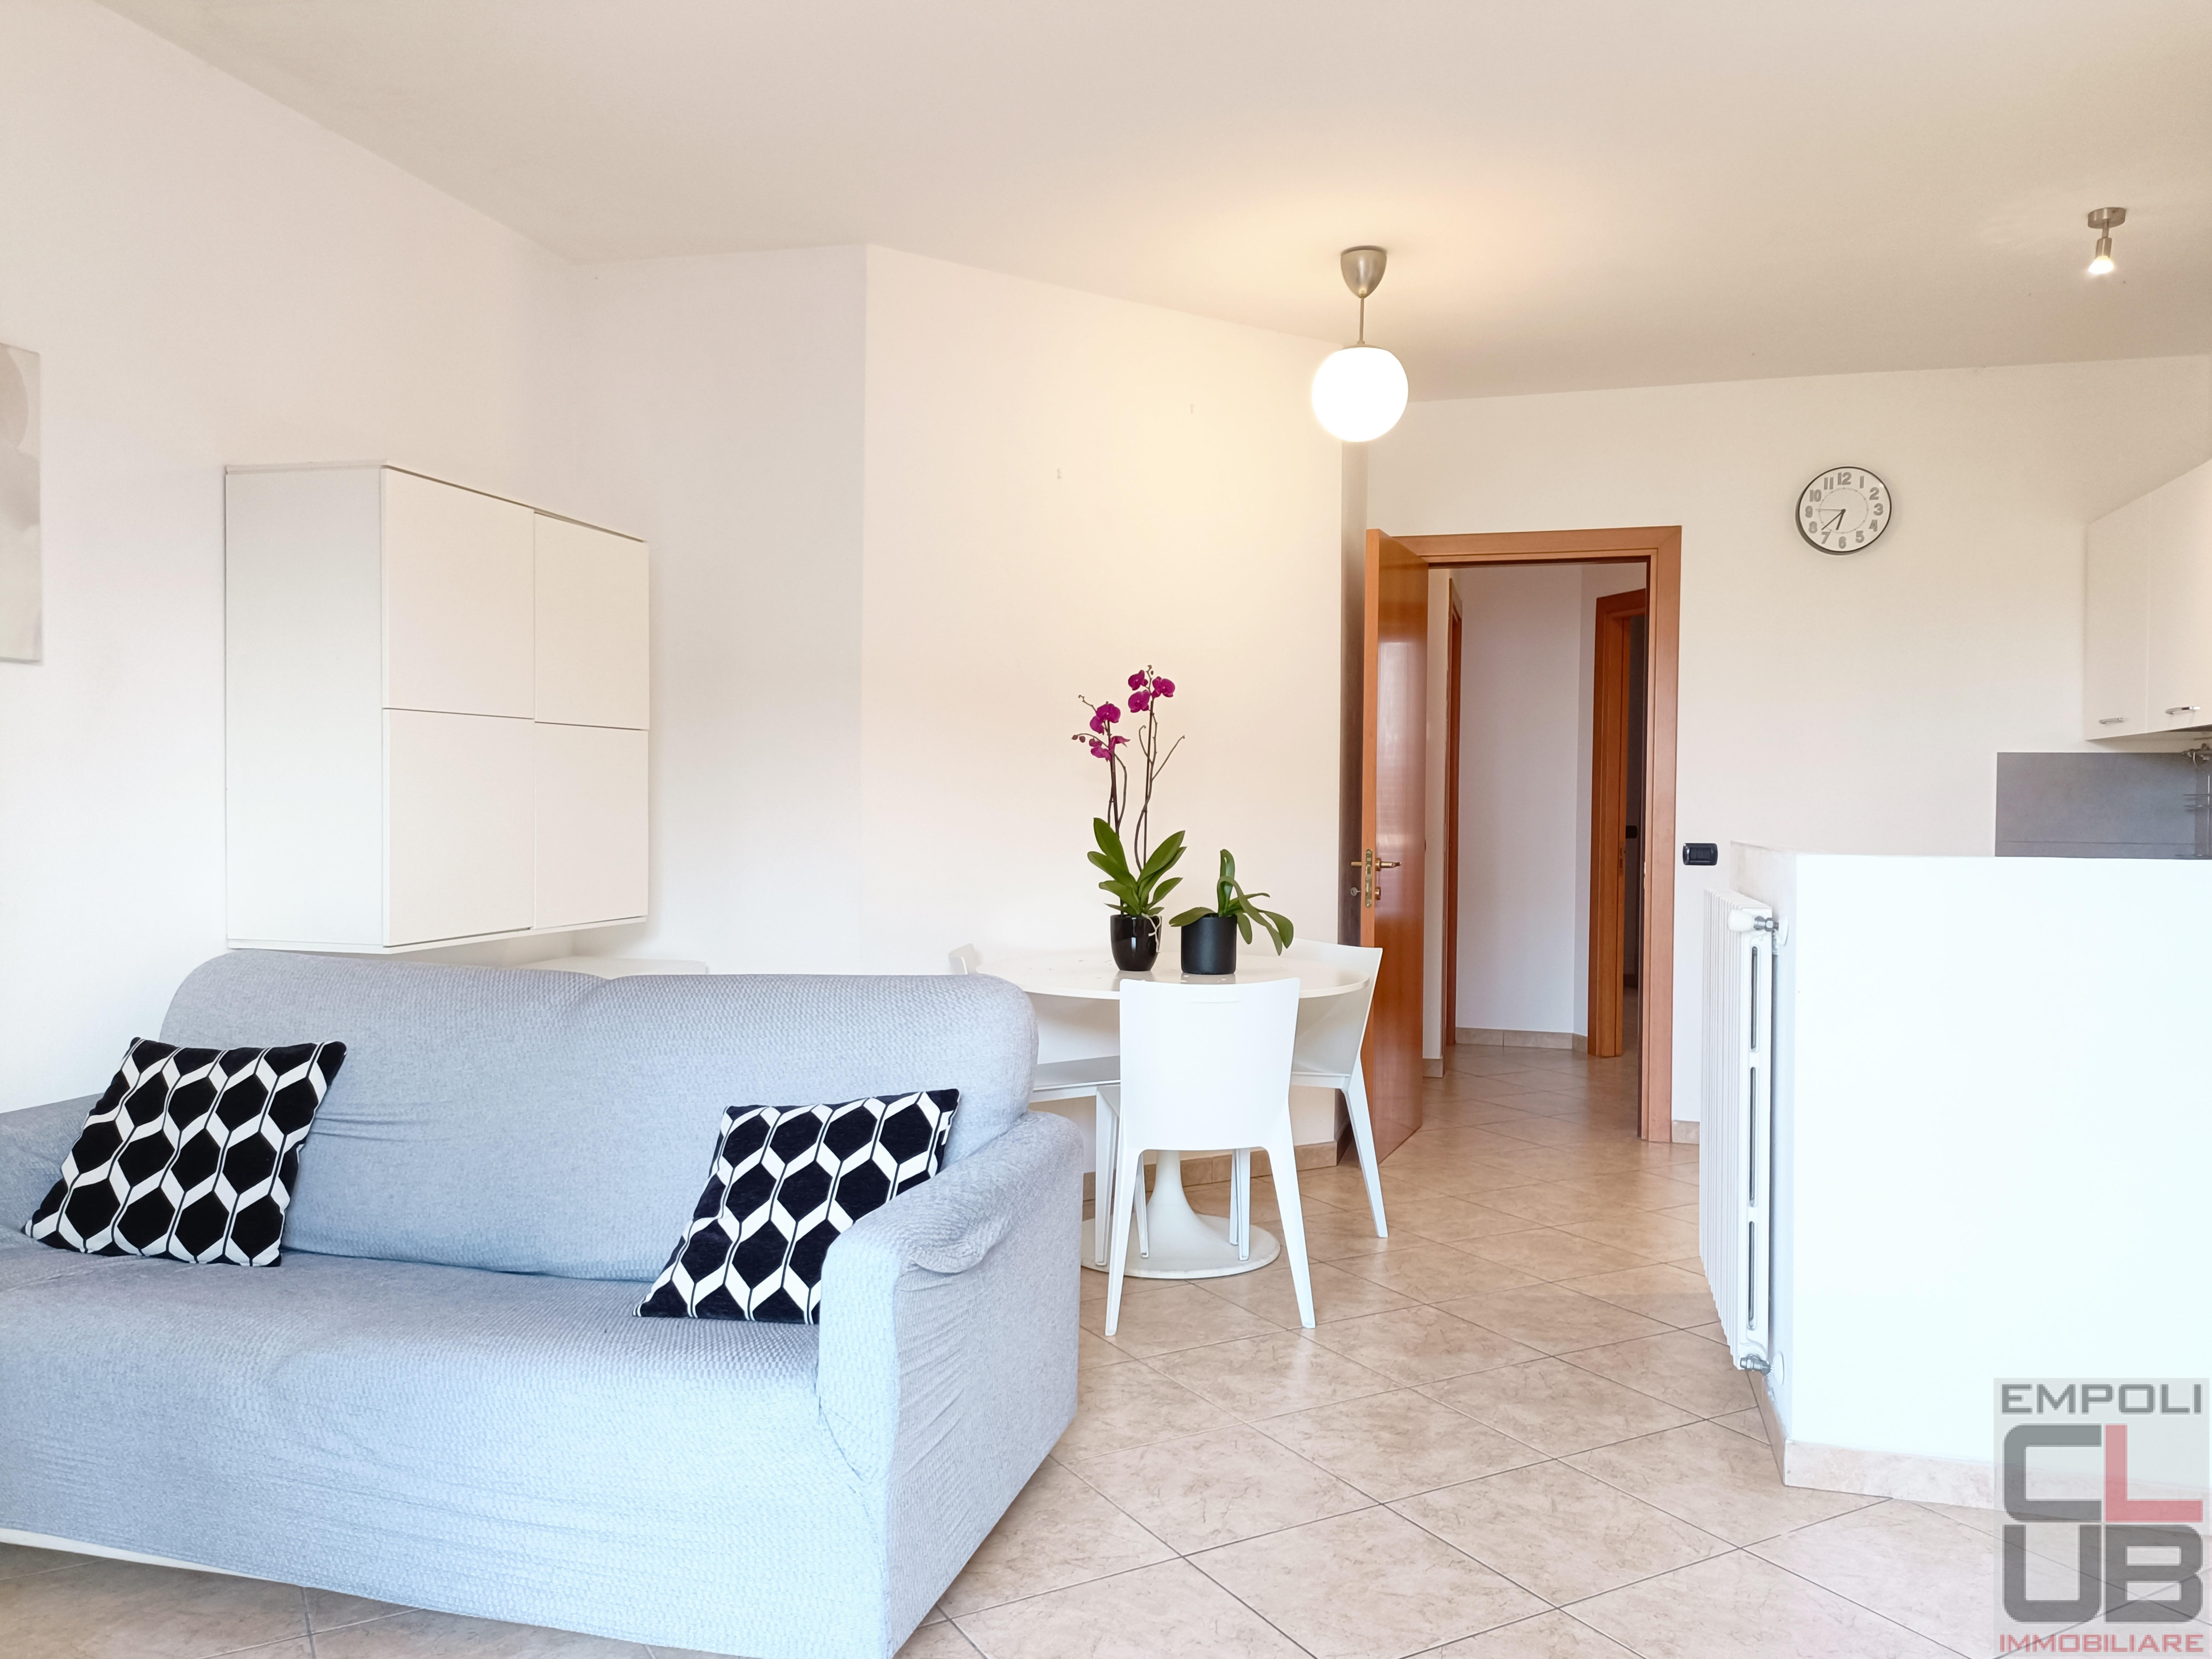 Apartment for rent in Empoli (FI)